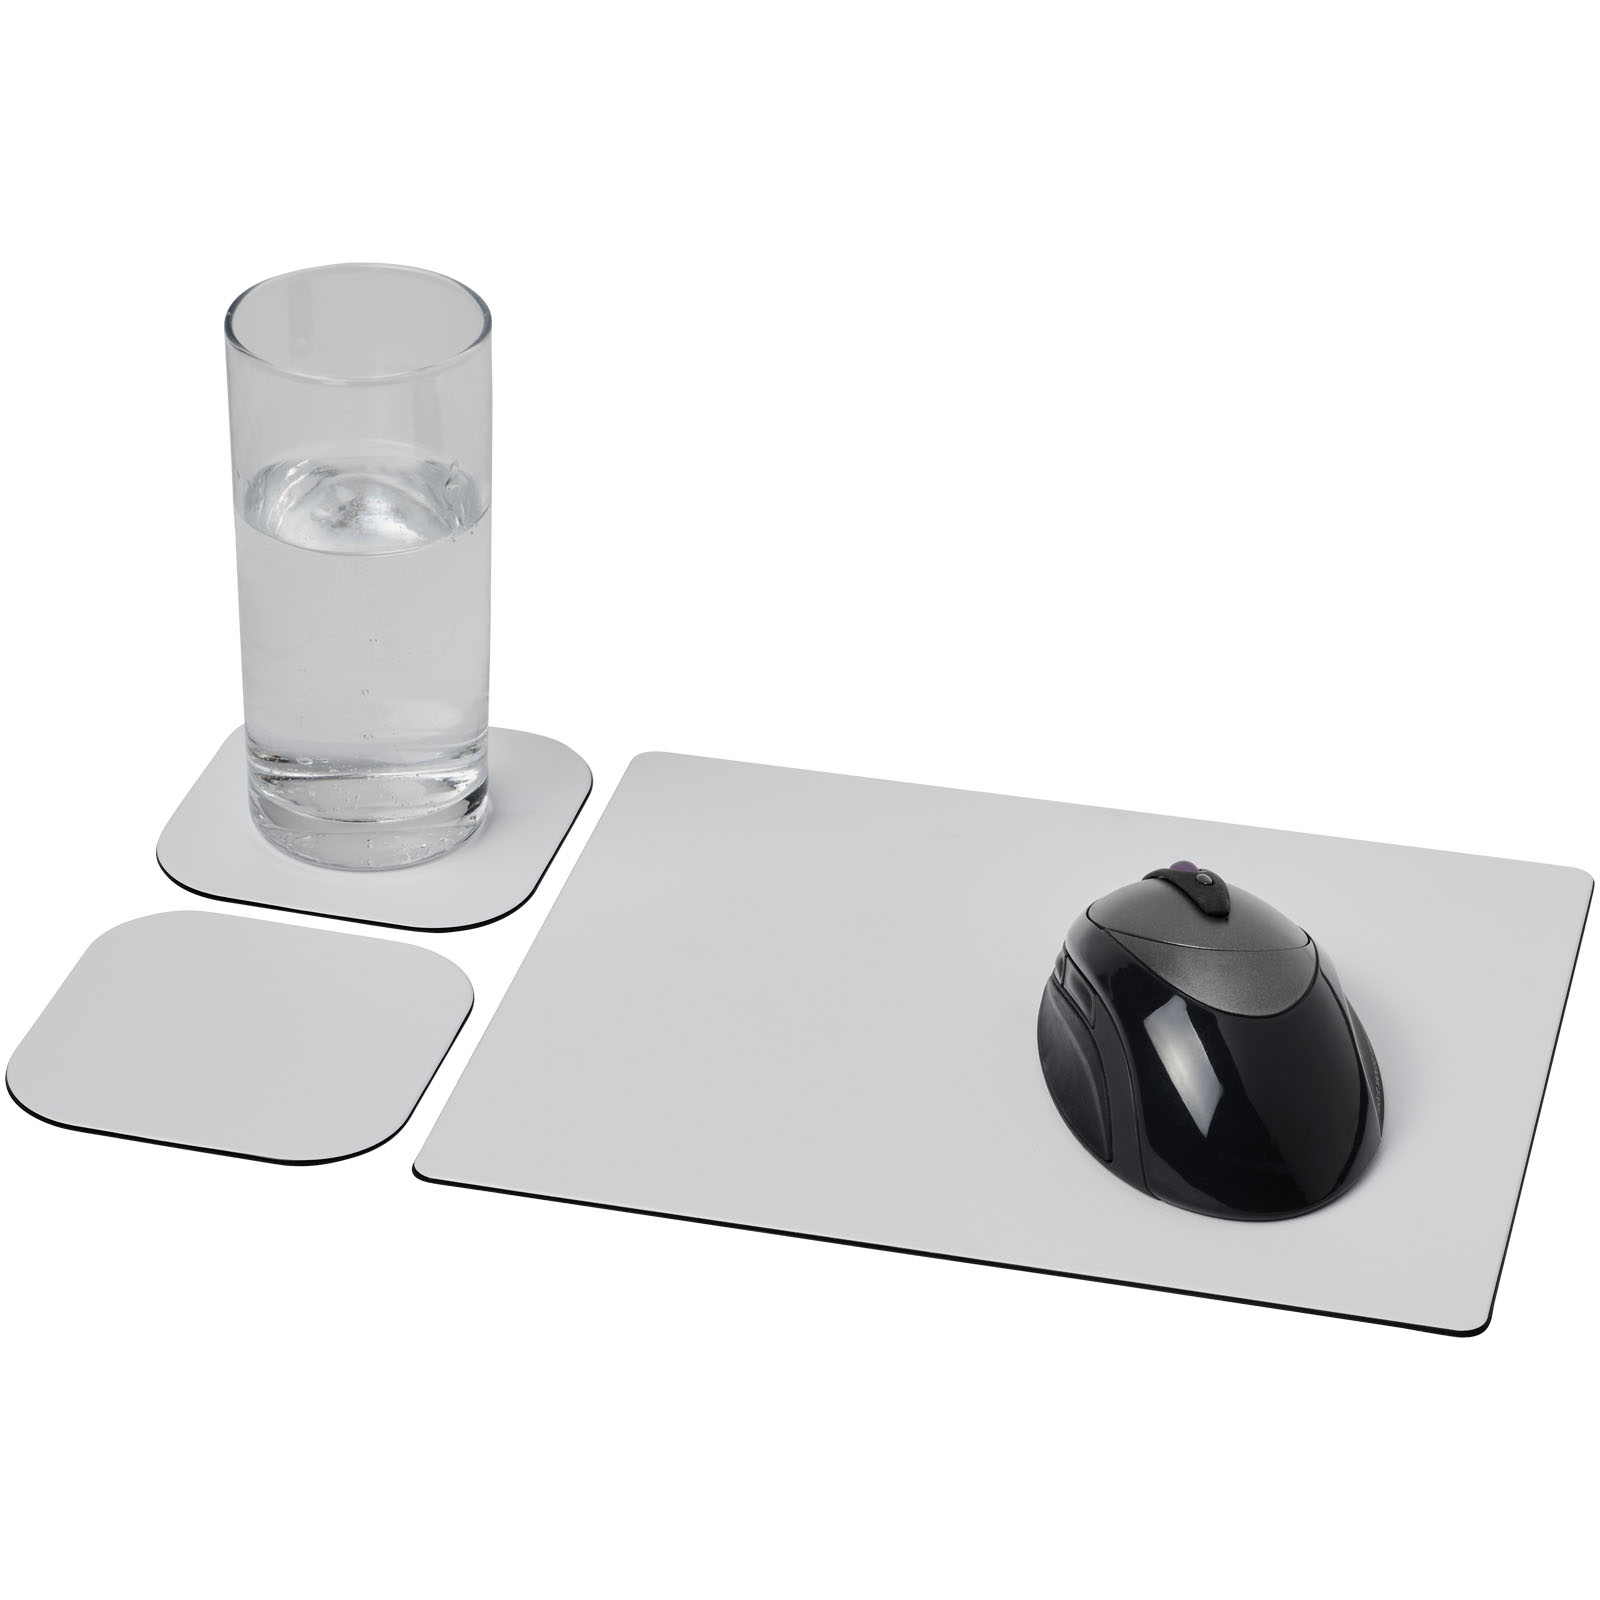 Computer Accessories - Brite-Mat® mouse mat and coaster set combo 3